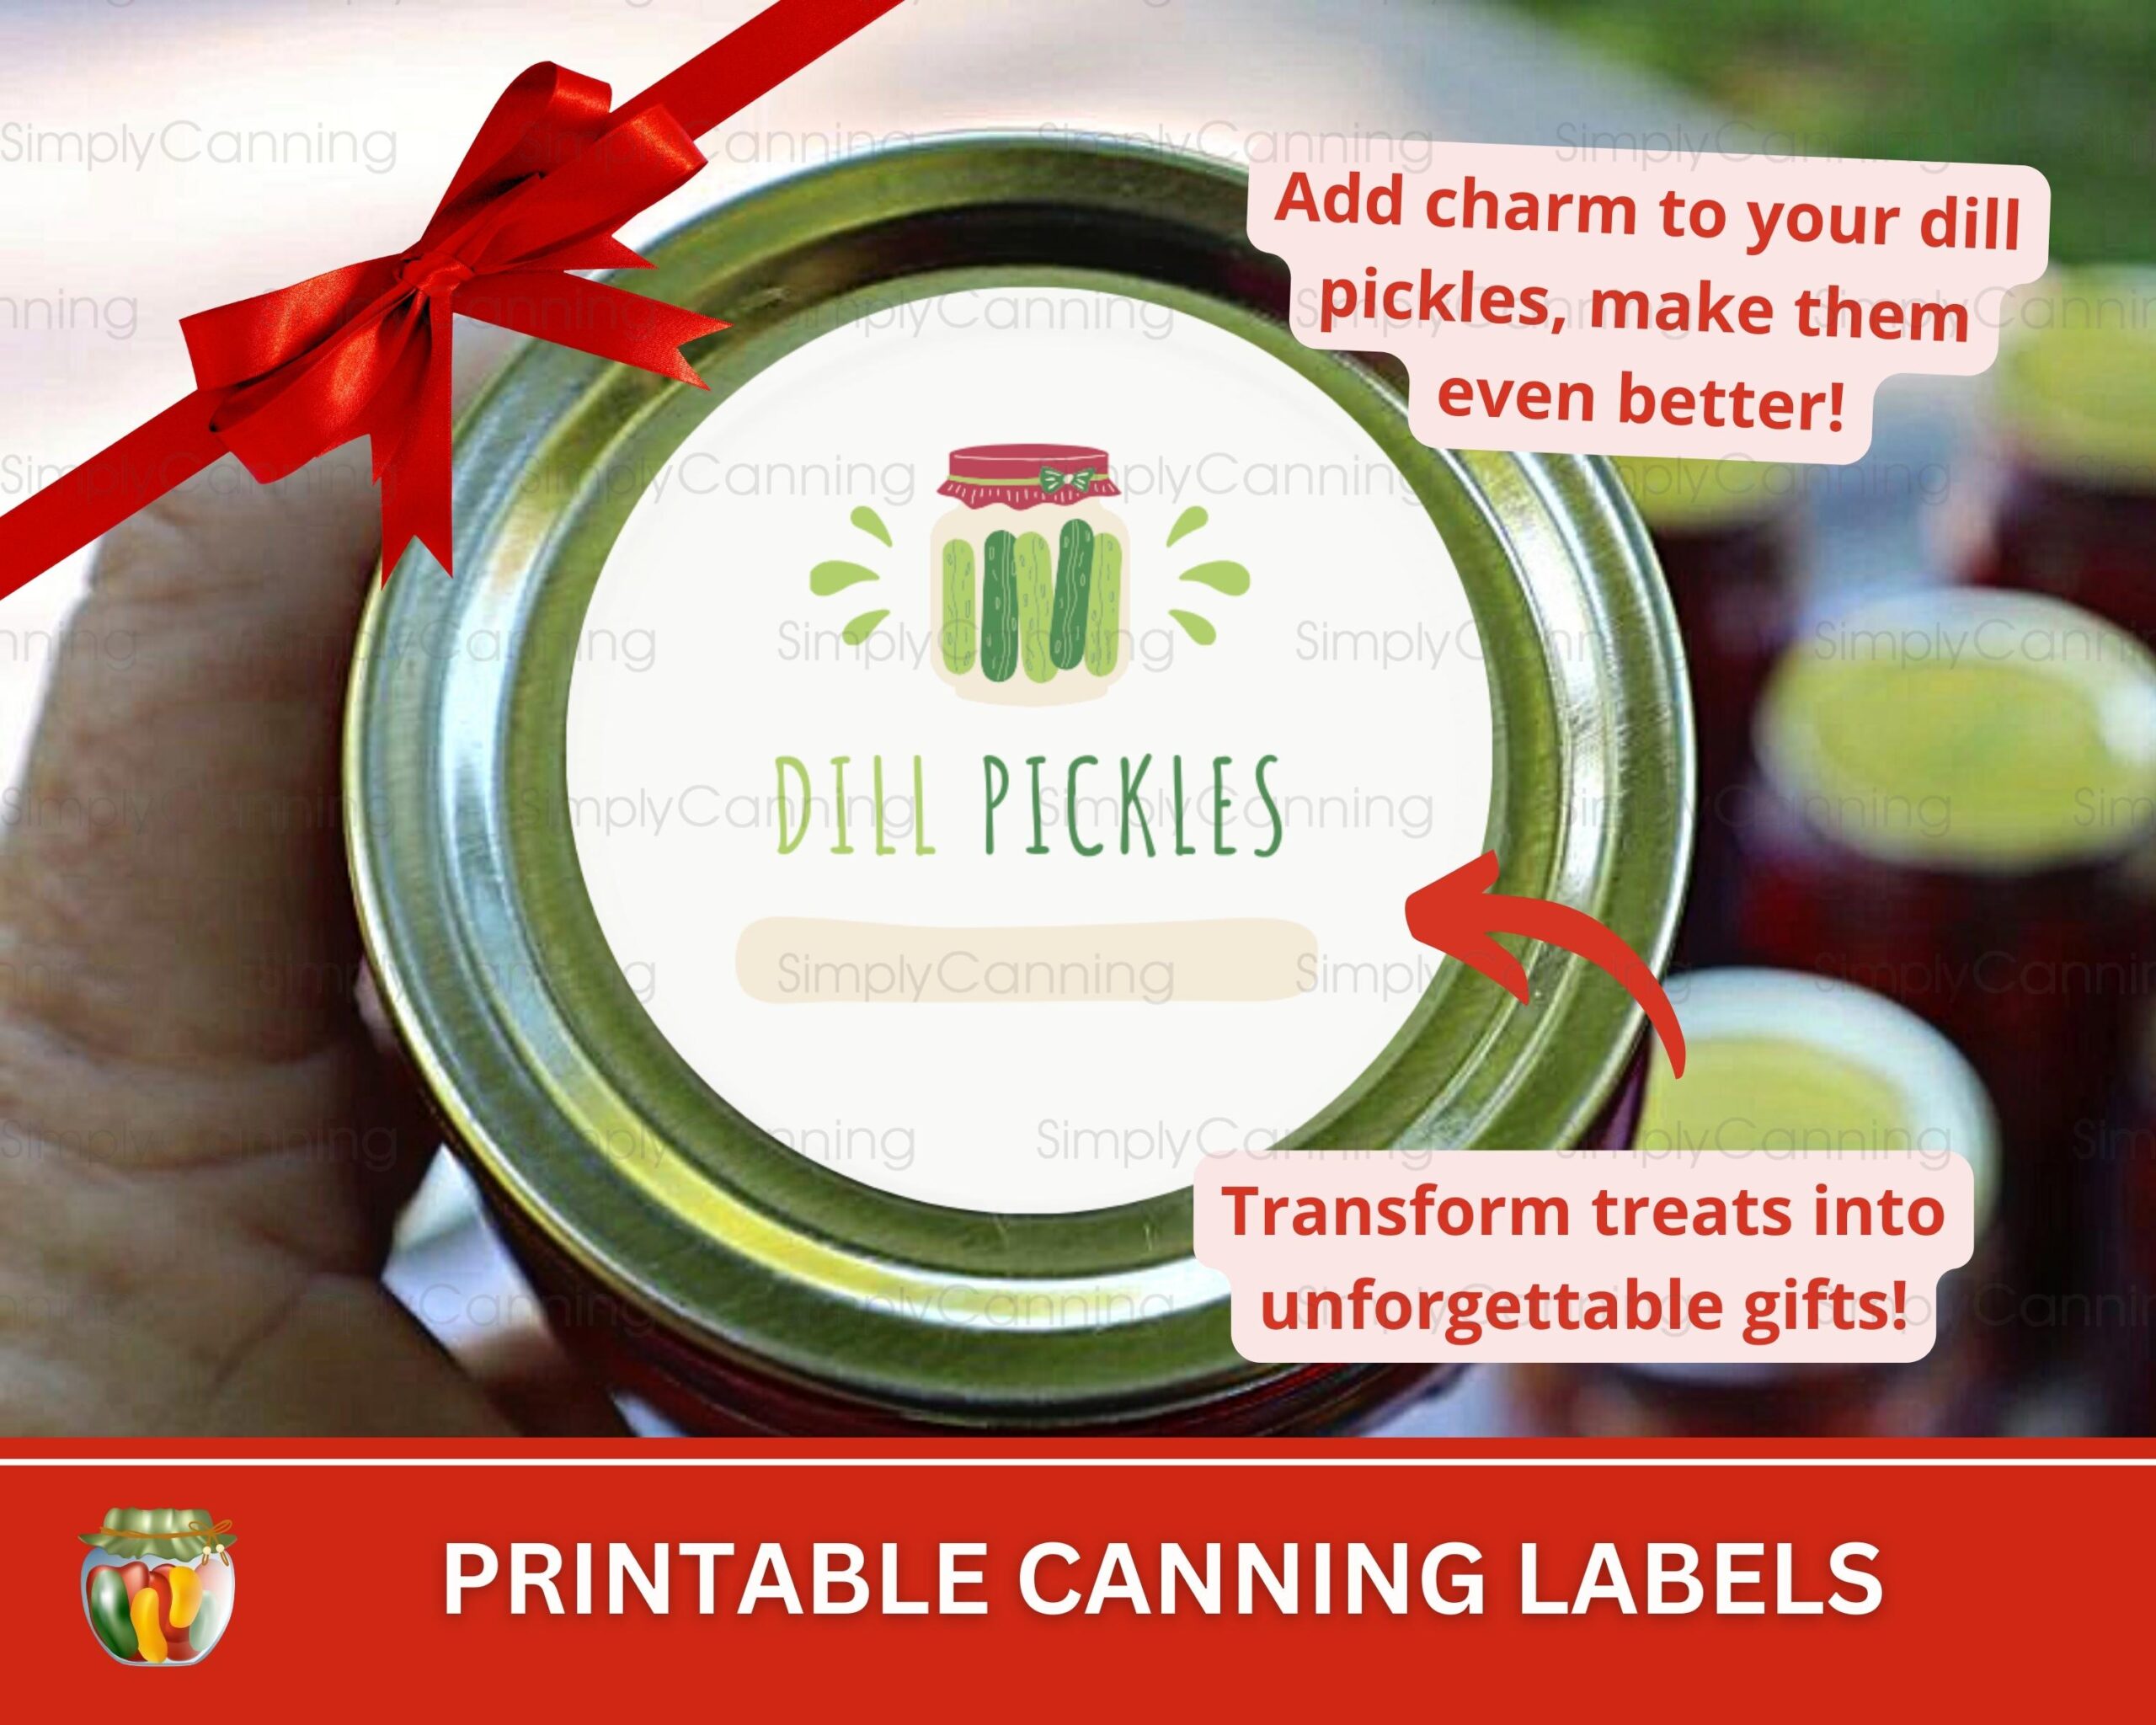 Image of dill pickles canning label, links to printable canning labels to purchase.